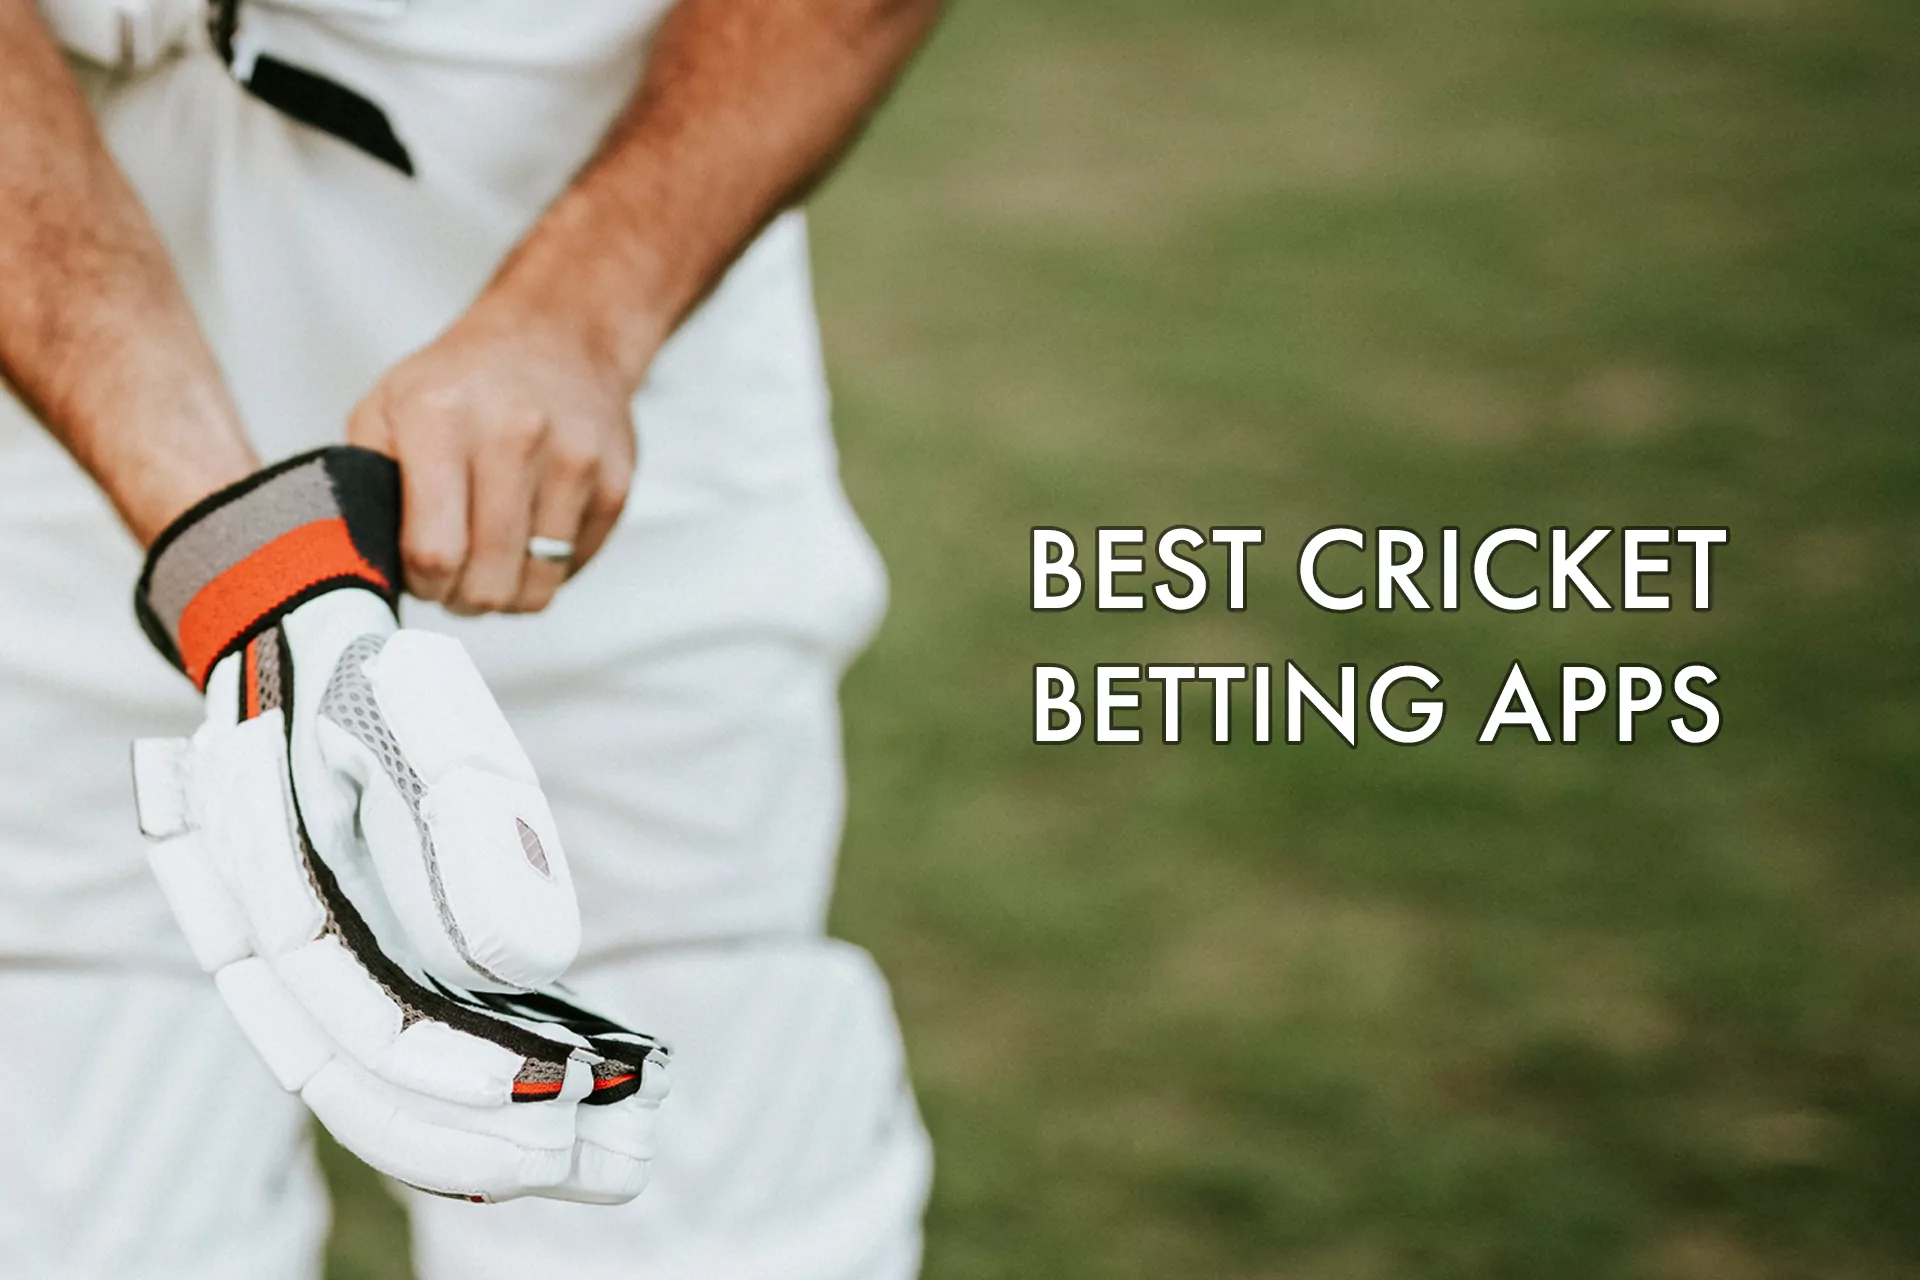 For cricket betting, Bettingonlinebd recommends using one of these apps.